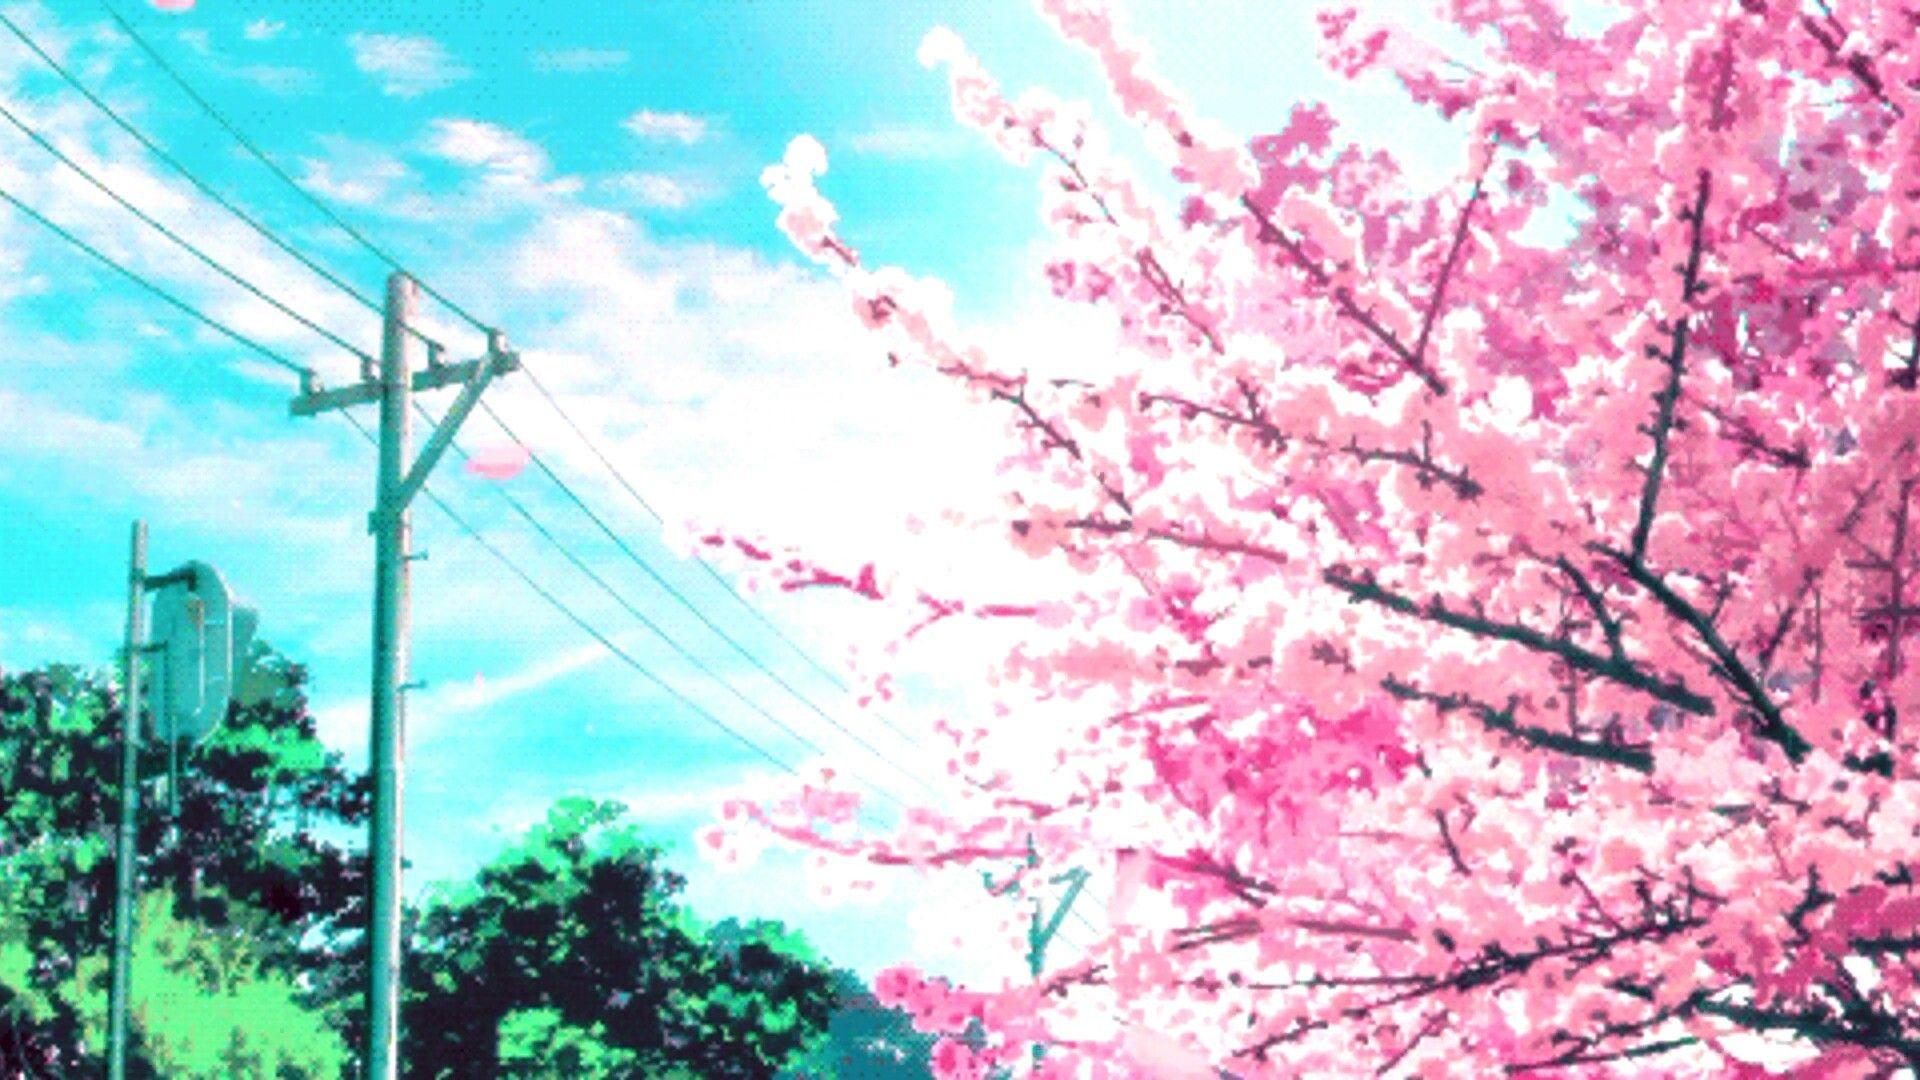 Anime Cherry Blossom 4K Wallpapers - Top Free Anime Cherry Blossom 4K